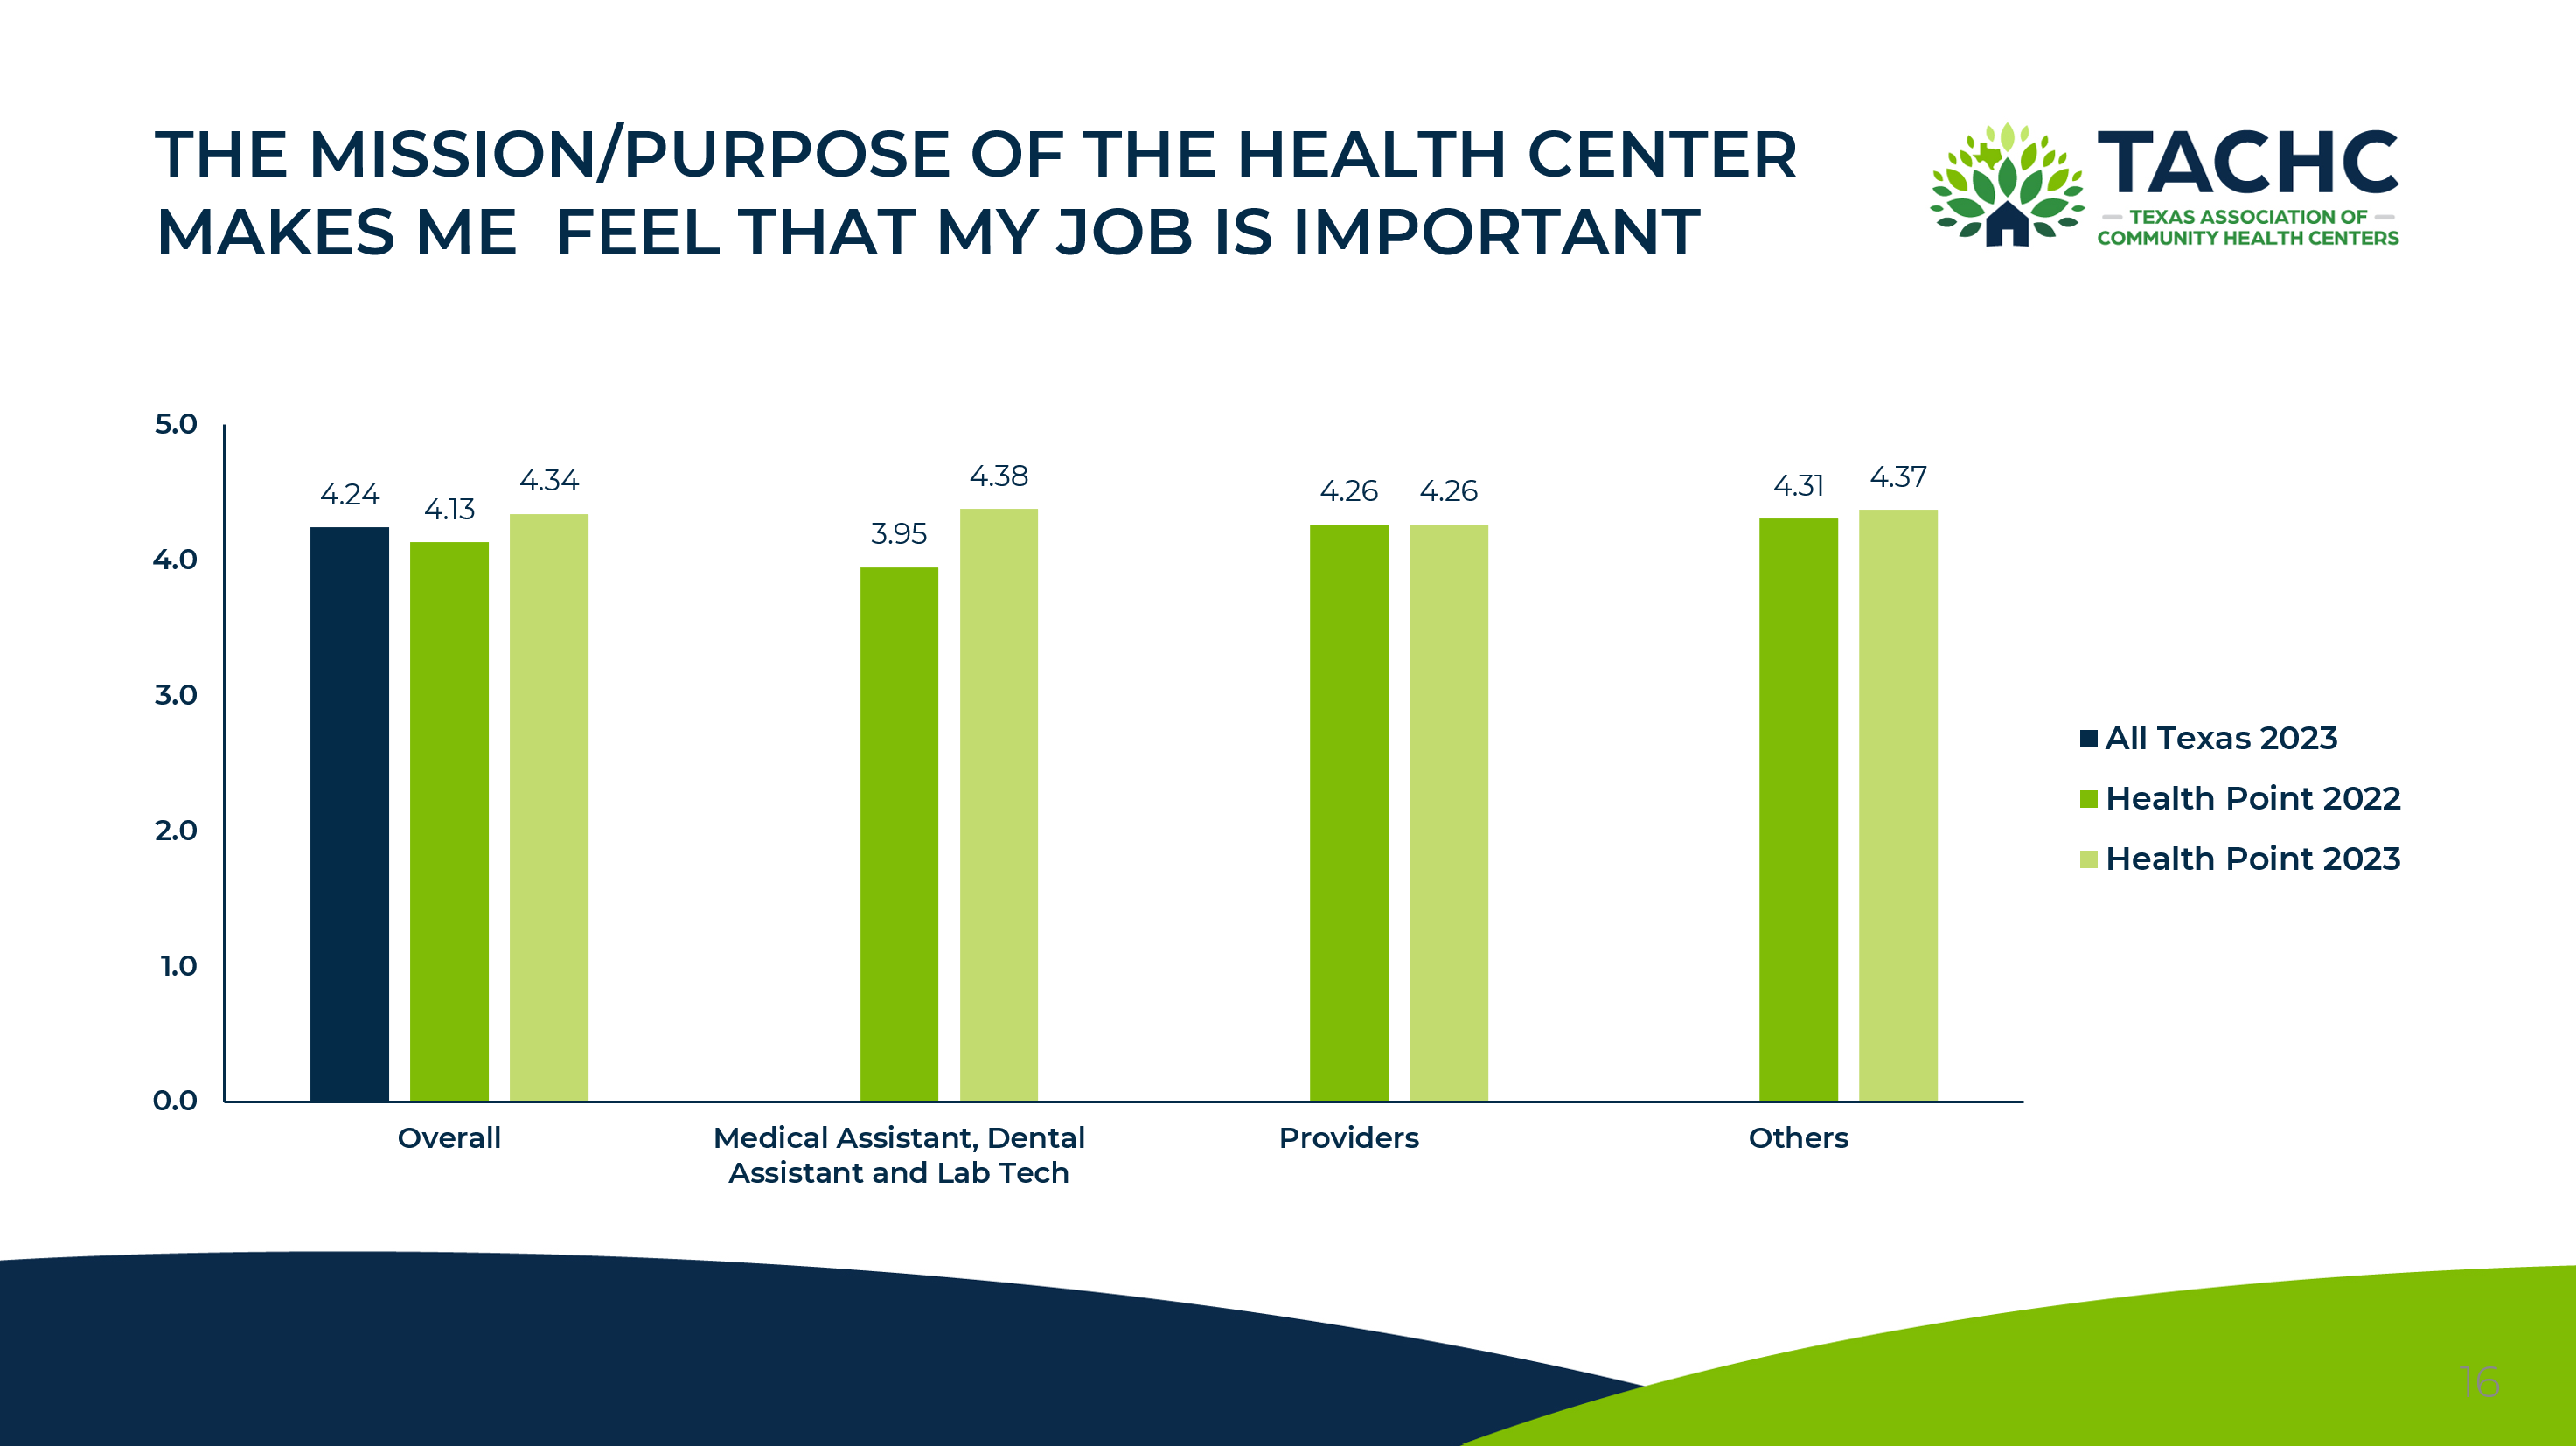 THE MISSION/PURPOSE OF THE HEALTH CENTER MAKES ME FEEL THAT MY JOB IS IMPORTANT